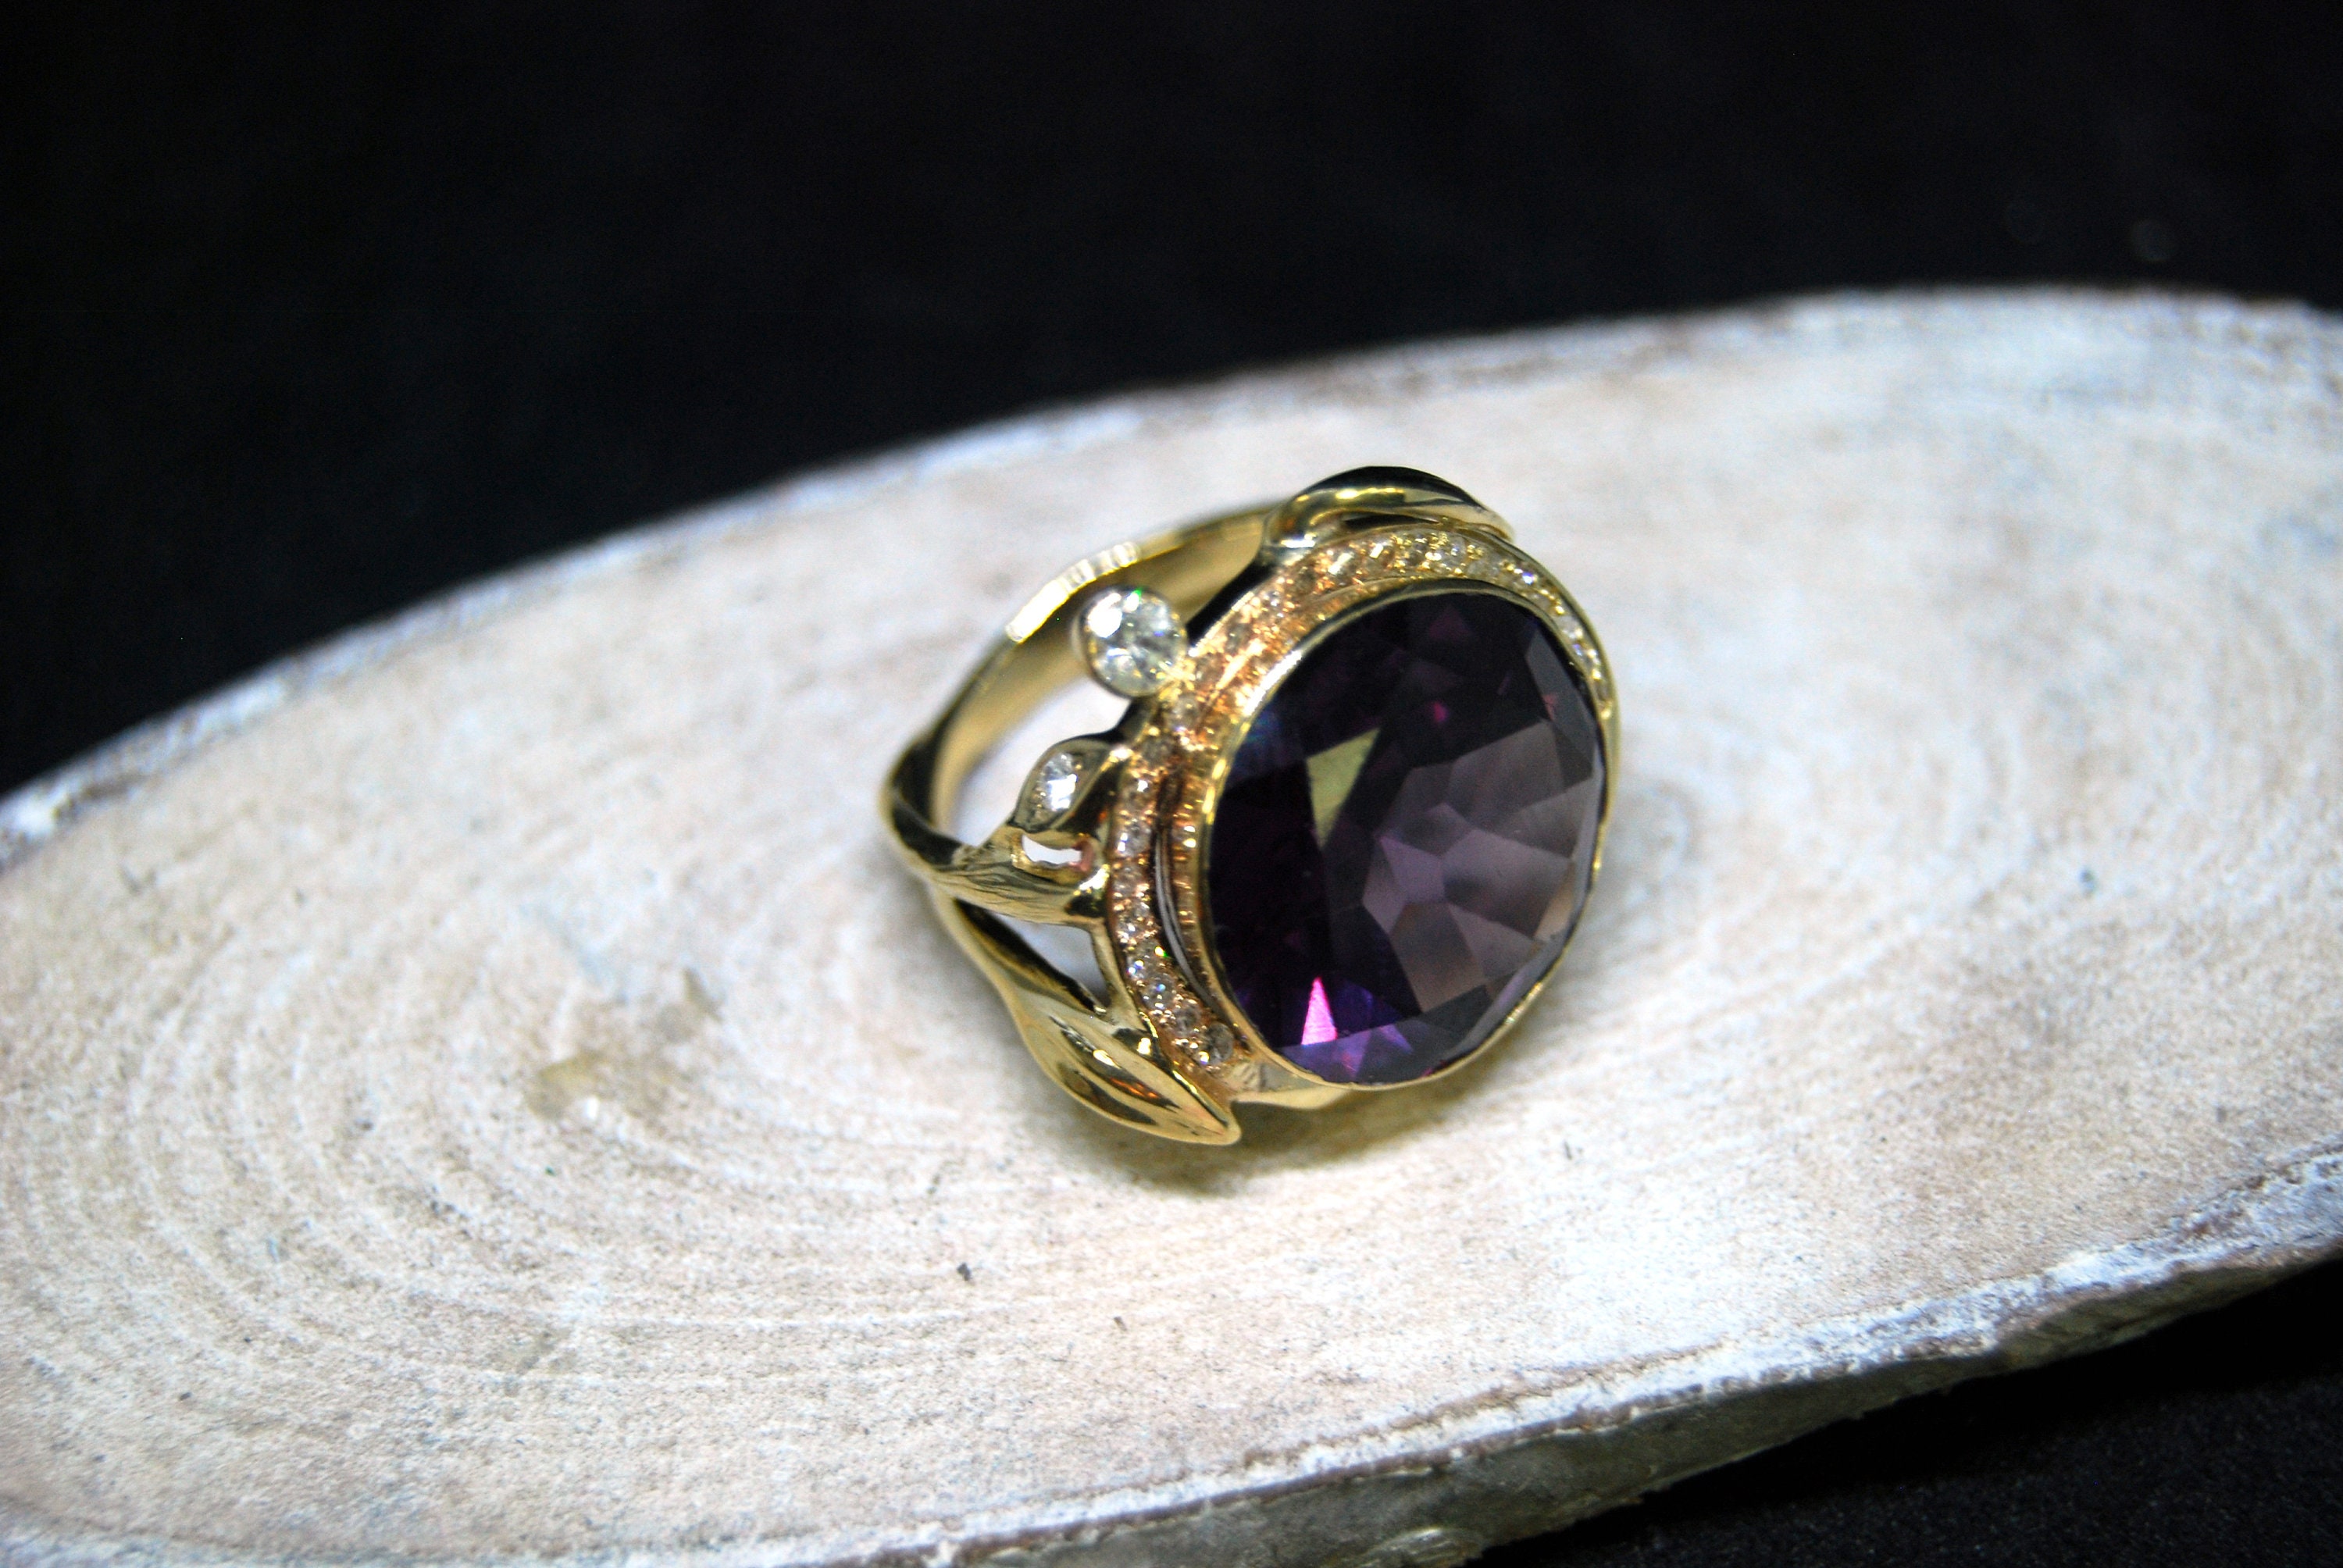 14K Gold Engagement Ring With Diamonds and Amethyst - Etsy